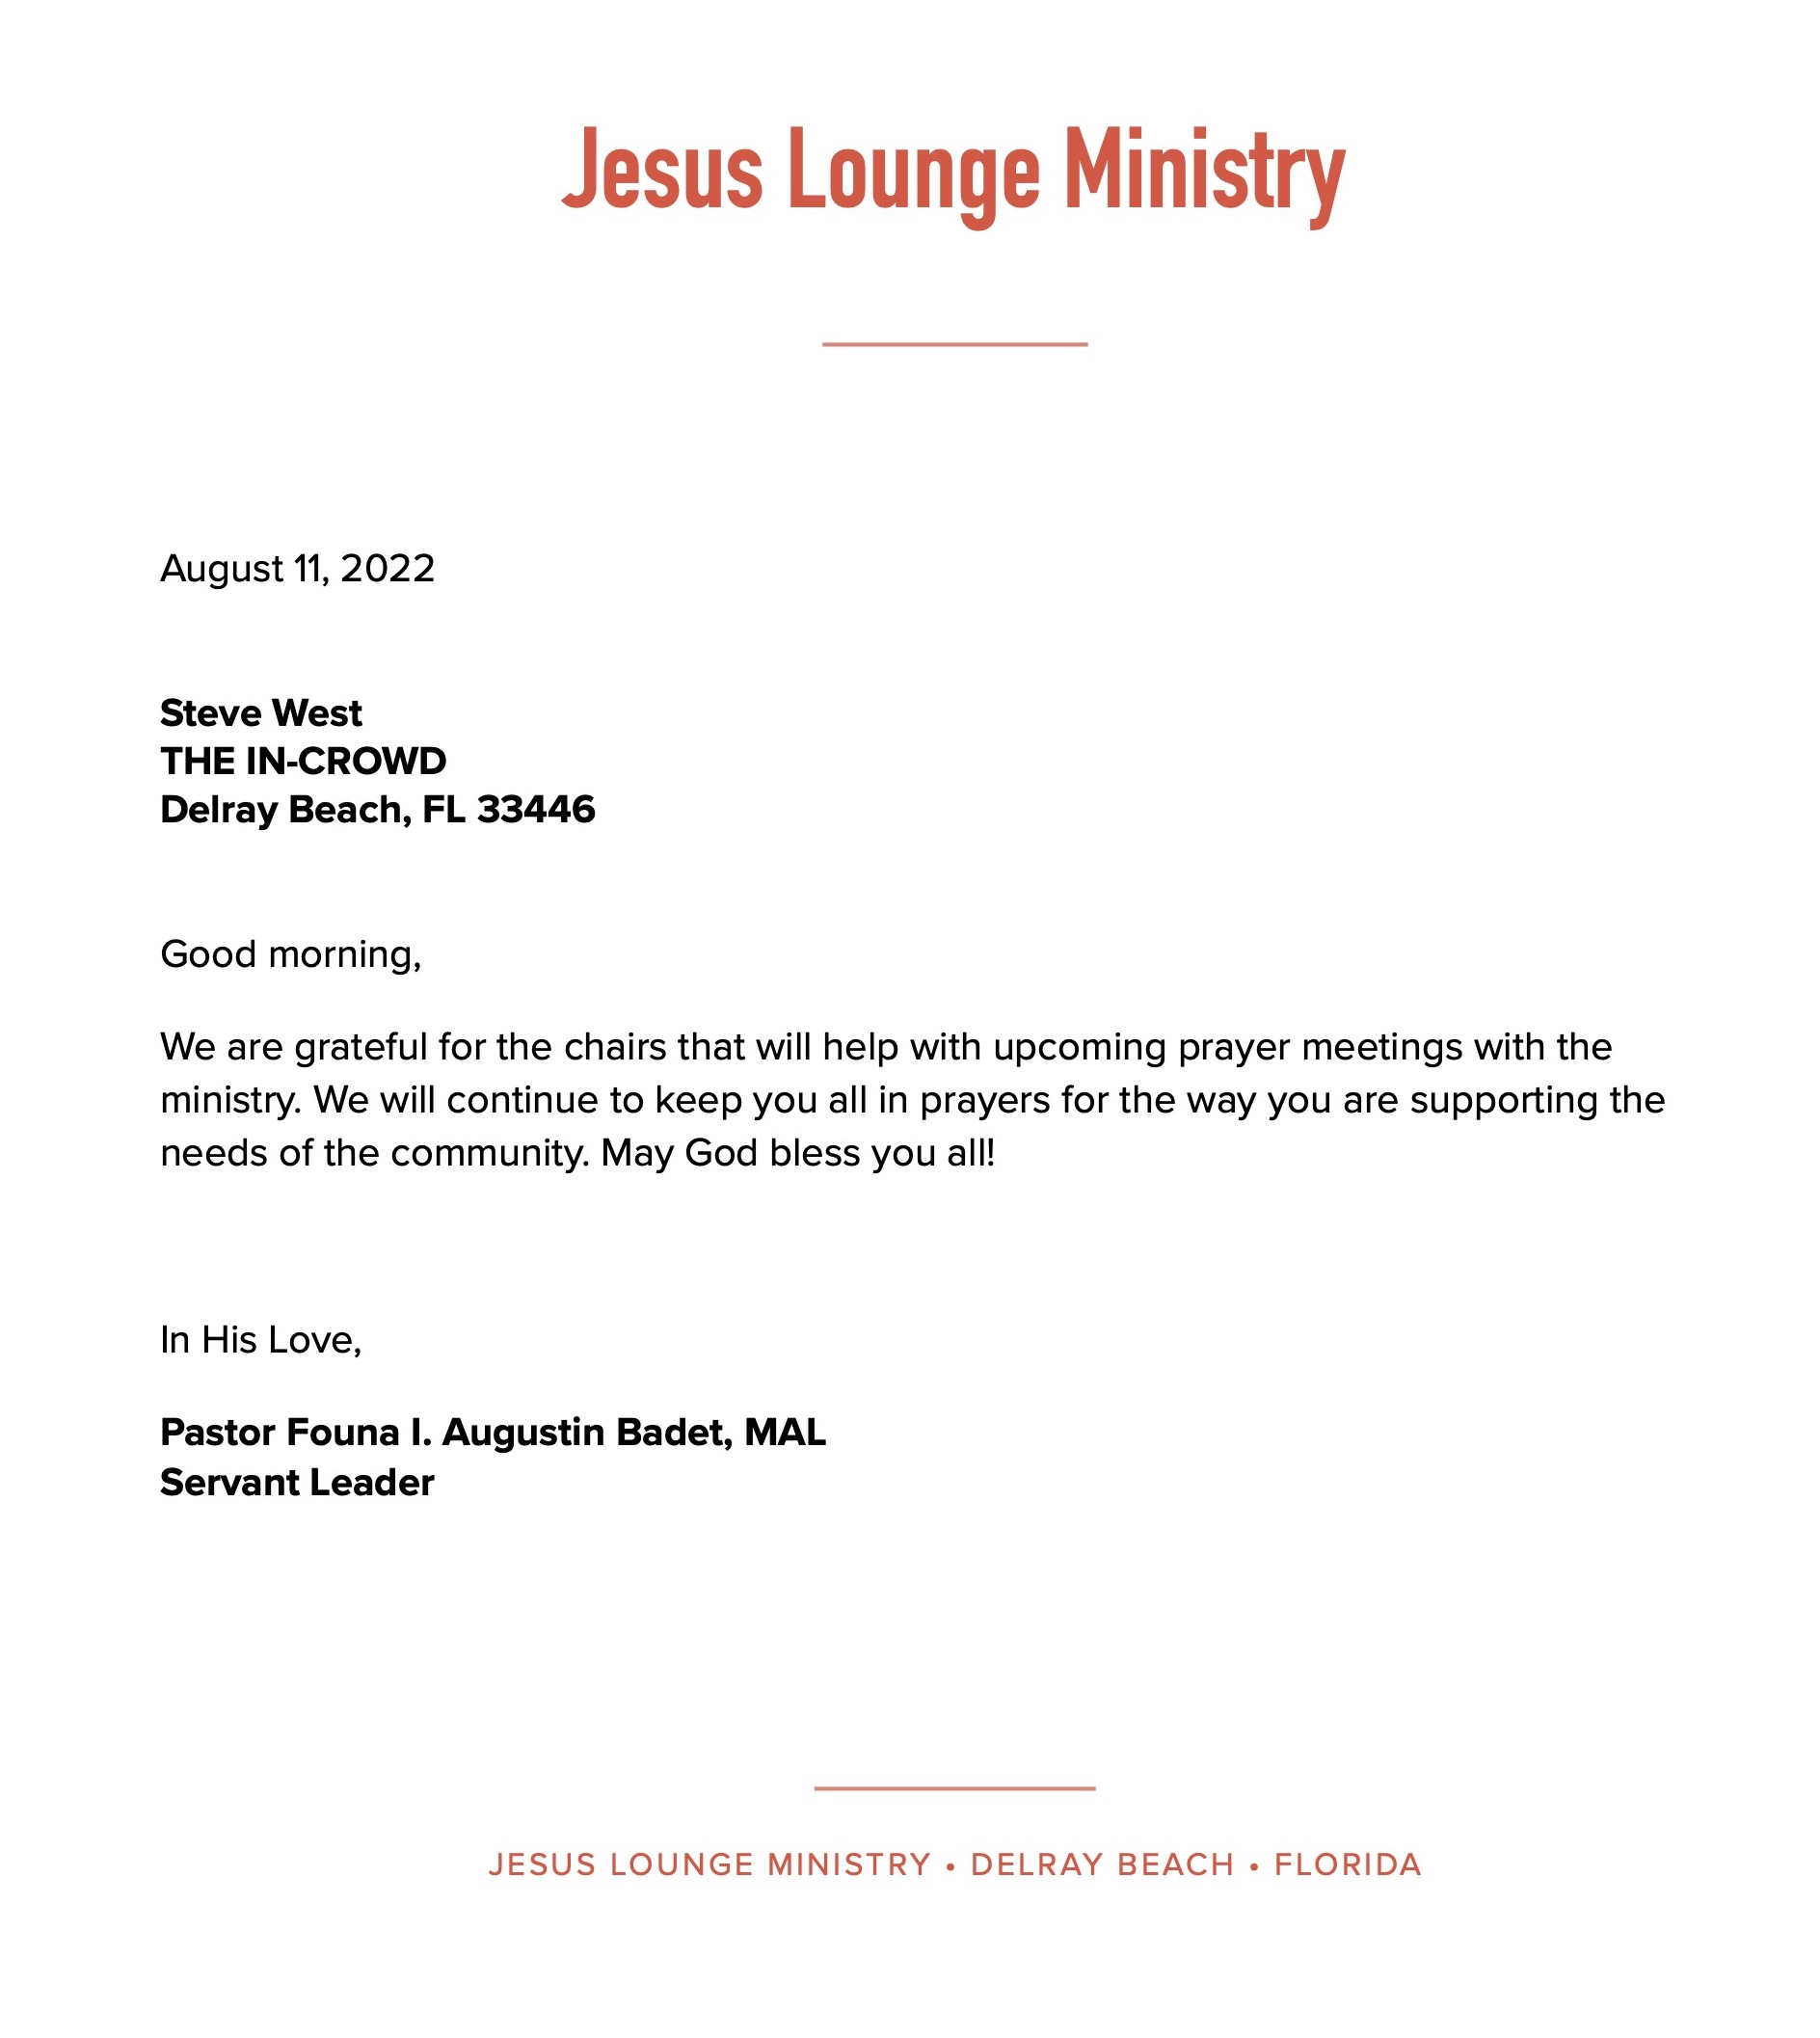 Thank You for Donations to Jesus Lounge Ministry